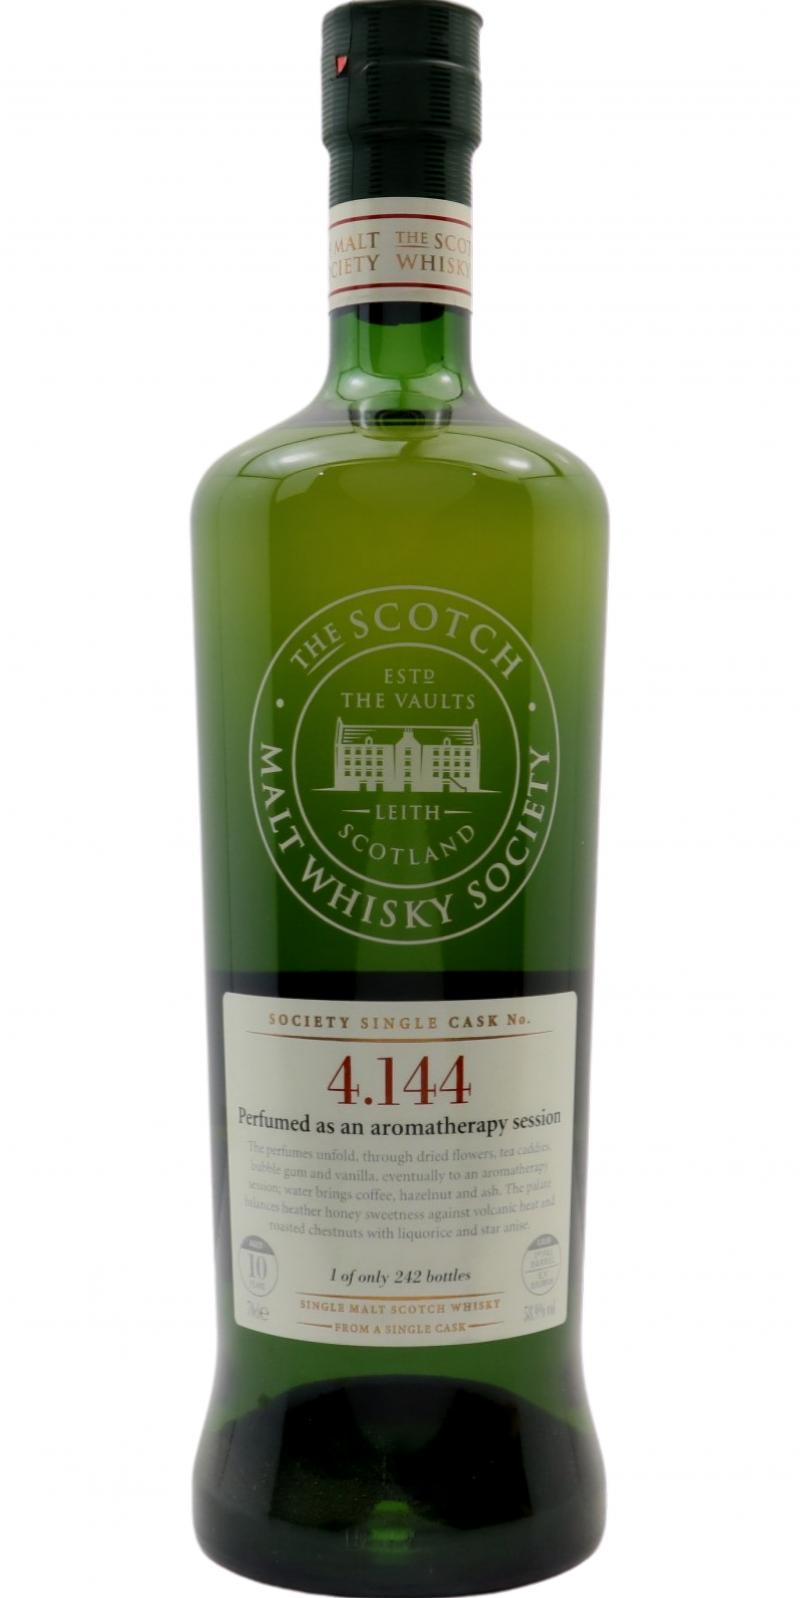 Highland Park 1999 SMWS 4.144 Perfumed as an aromatherapy session 1st Fill Bourbon Barrel 4.144 58.9% 700ml